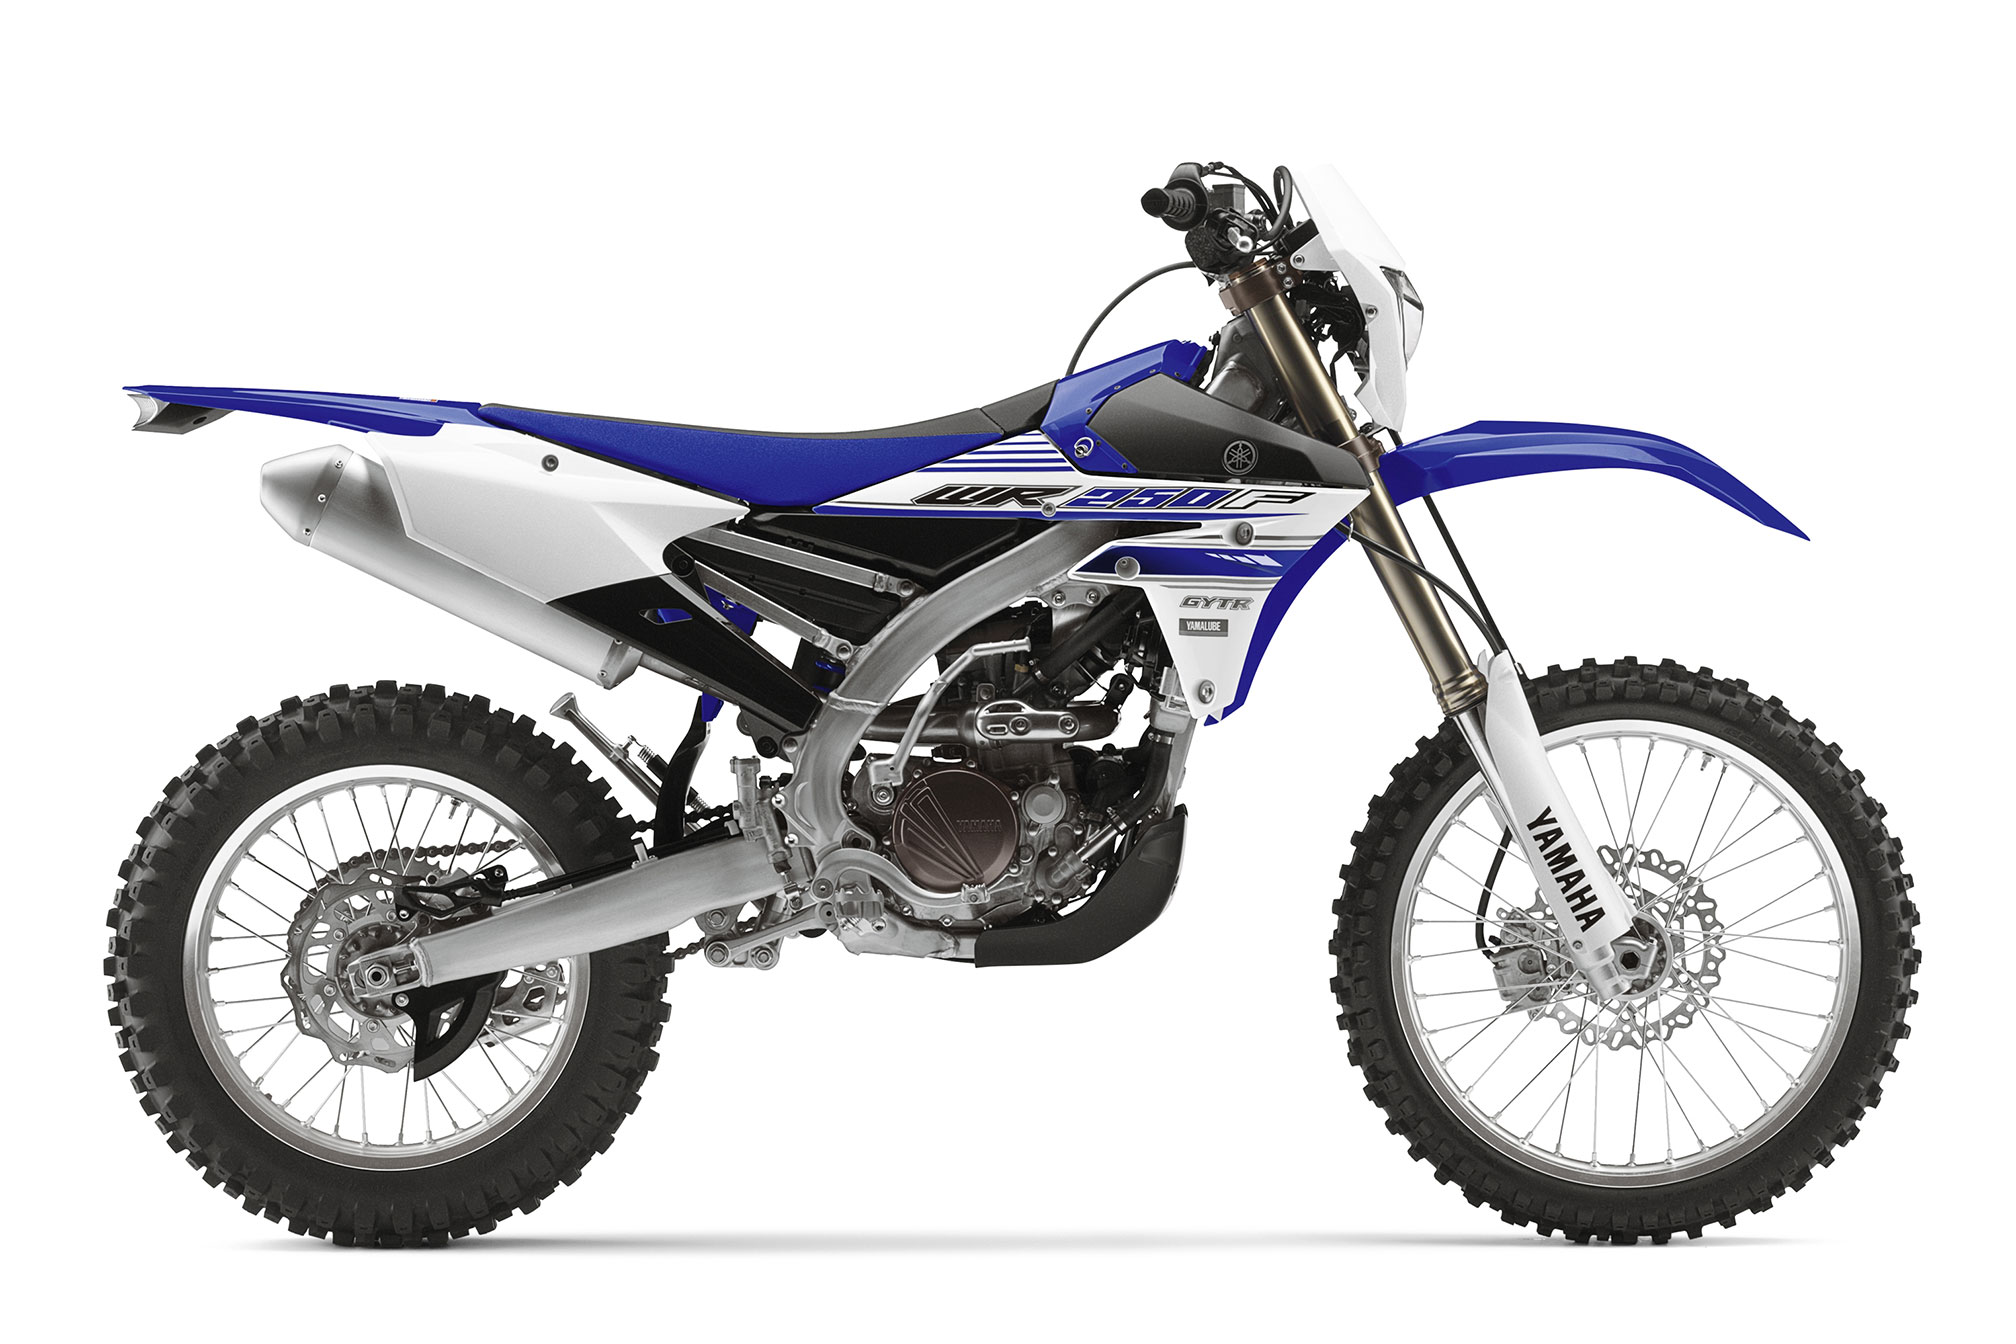 2021 Yamaha WR250F Guide • Total Motorcycle